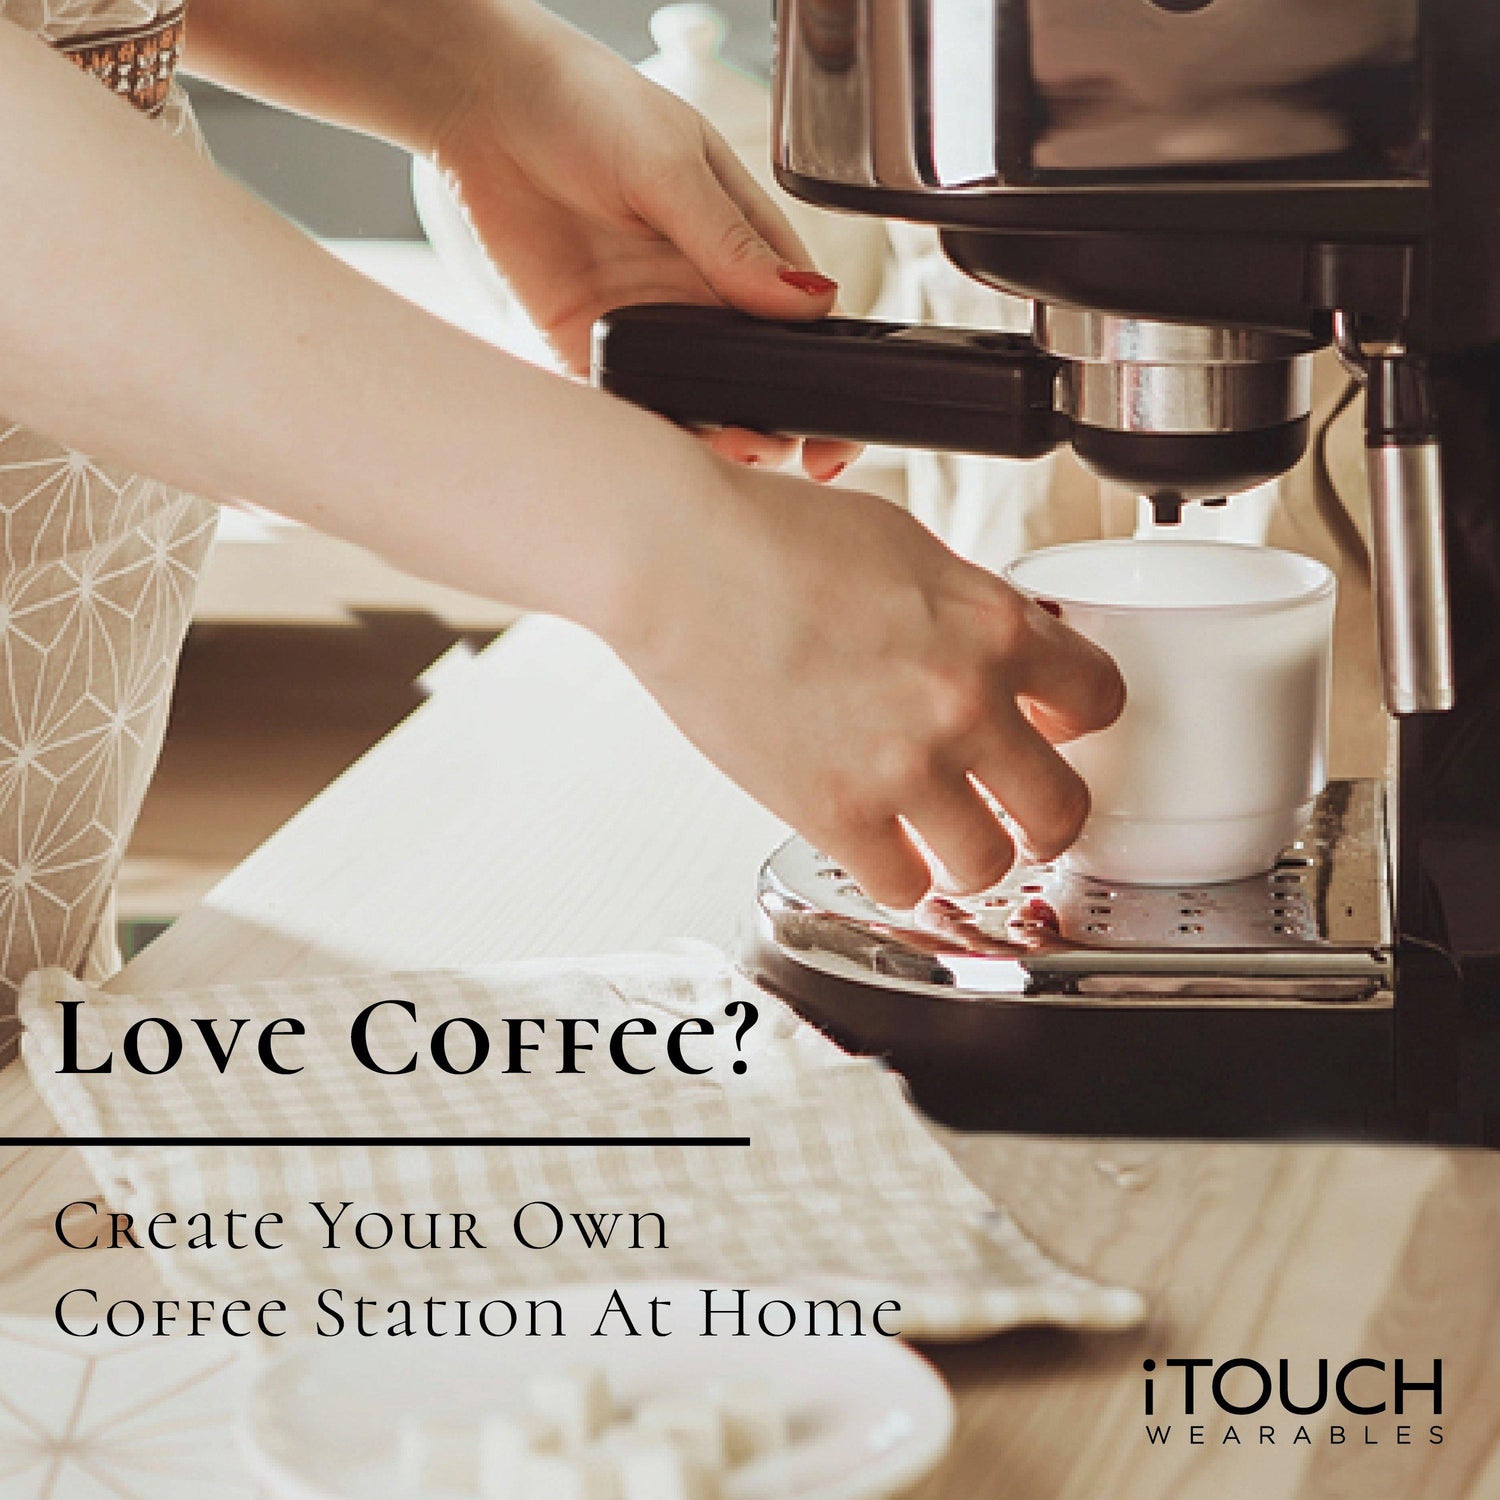 Love Coffee? Create Your Own Coffee Station At Home - iTOUCH Wearables